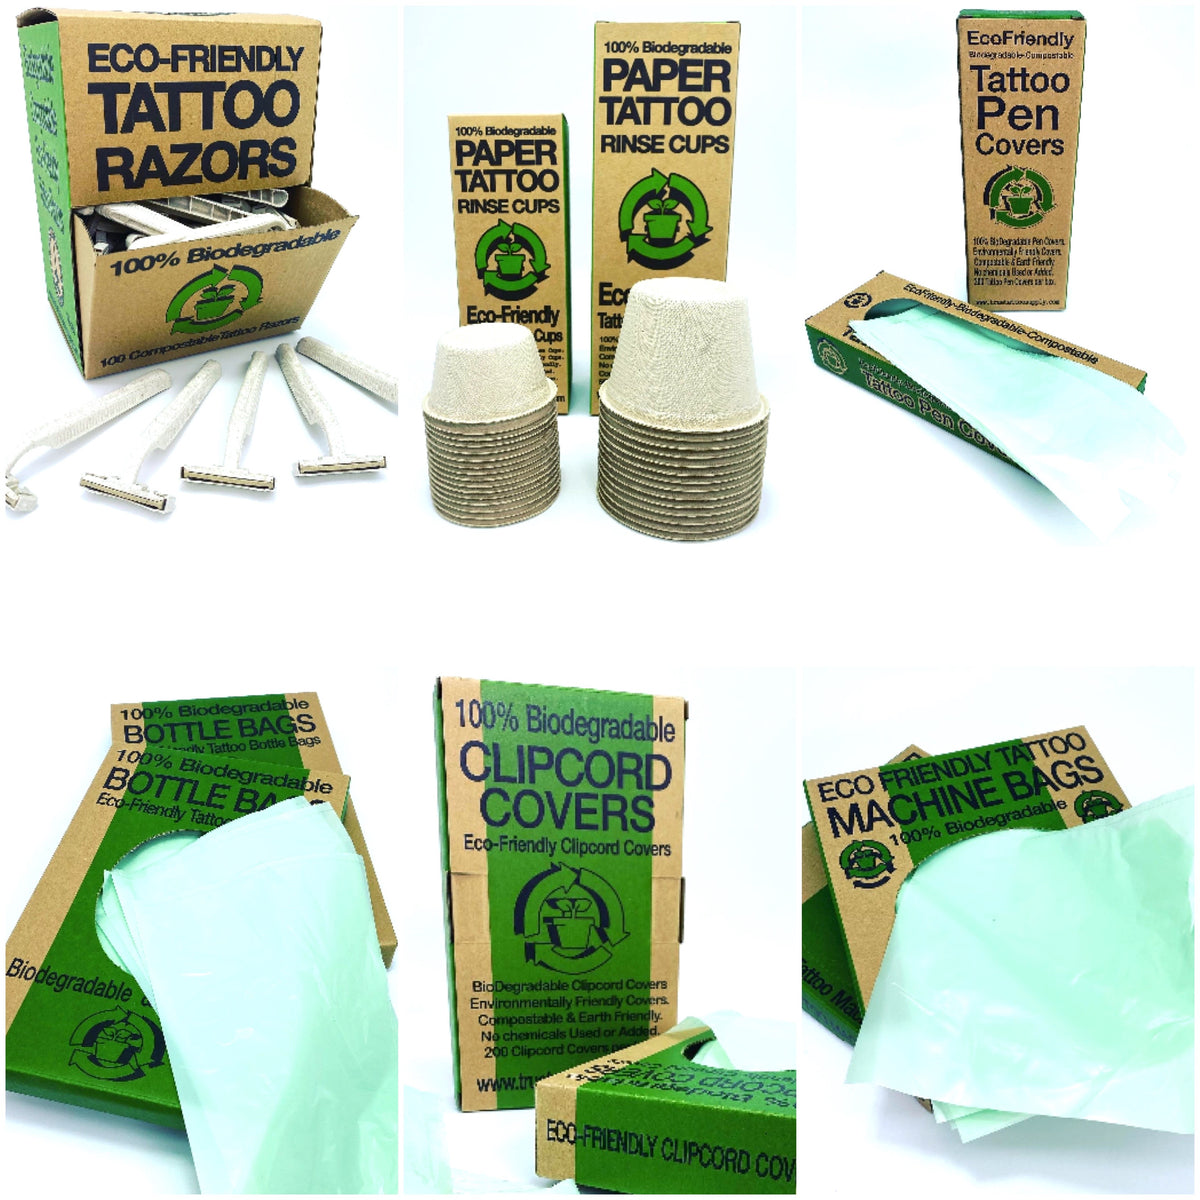 What Tattoo Equipment Do You Need to Start Tattooing Practice Skins? |  Tattoos Spot